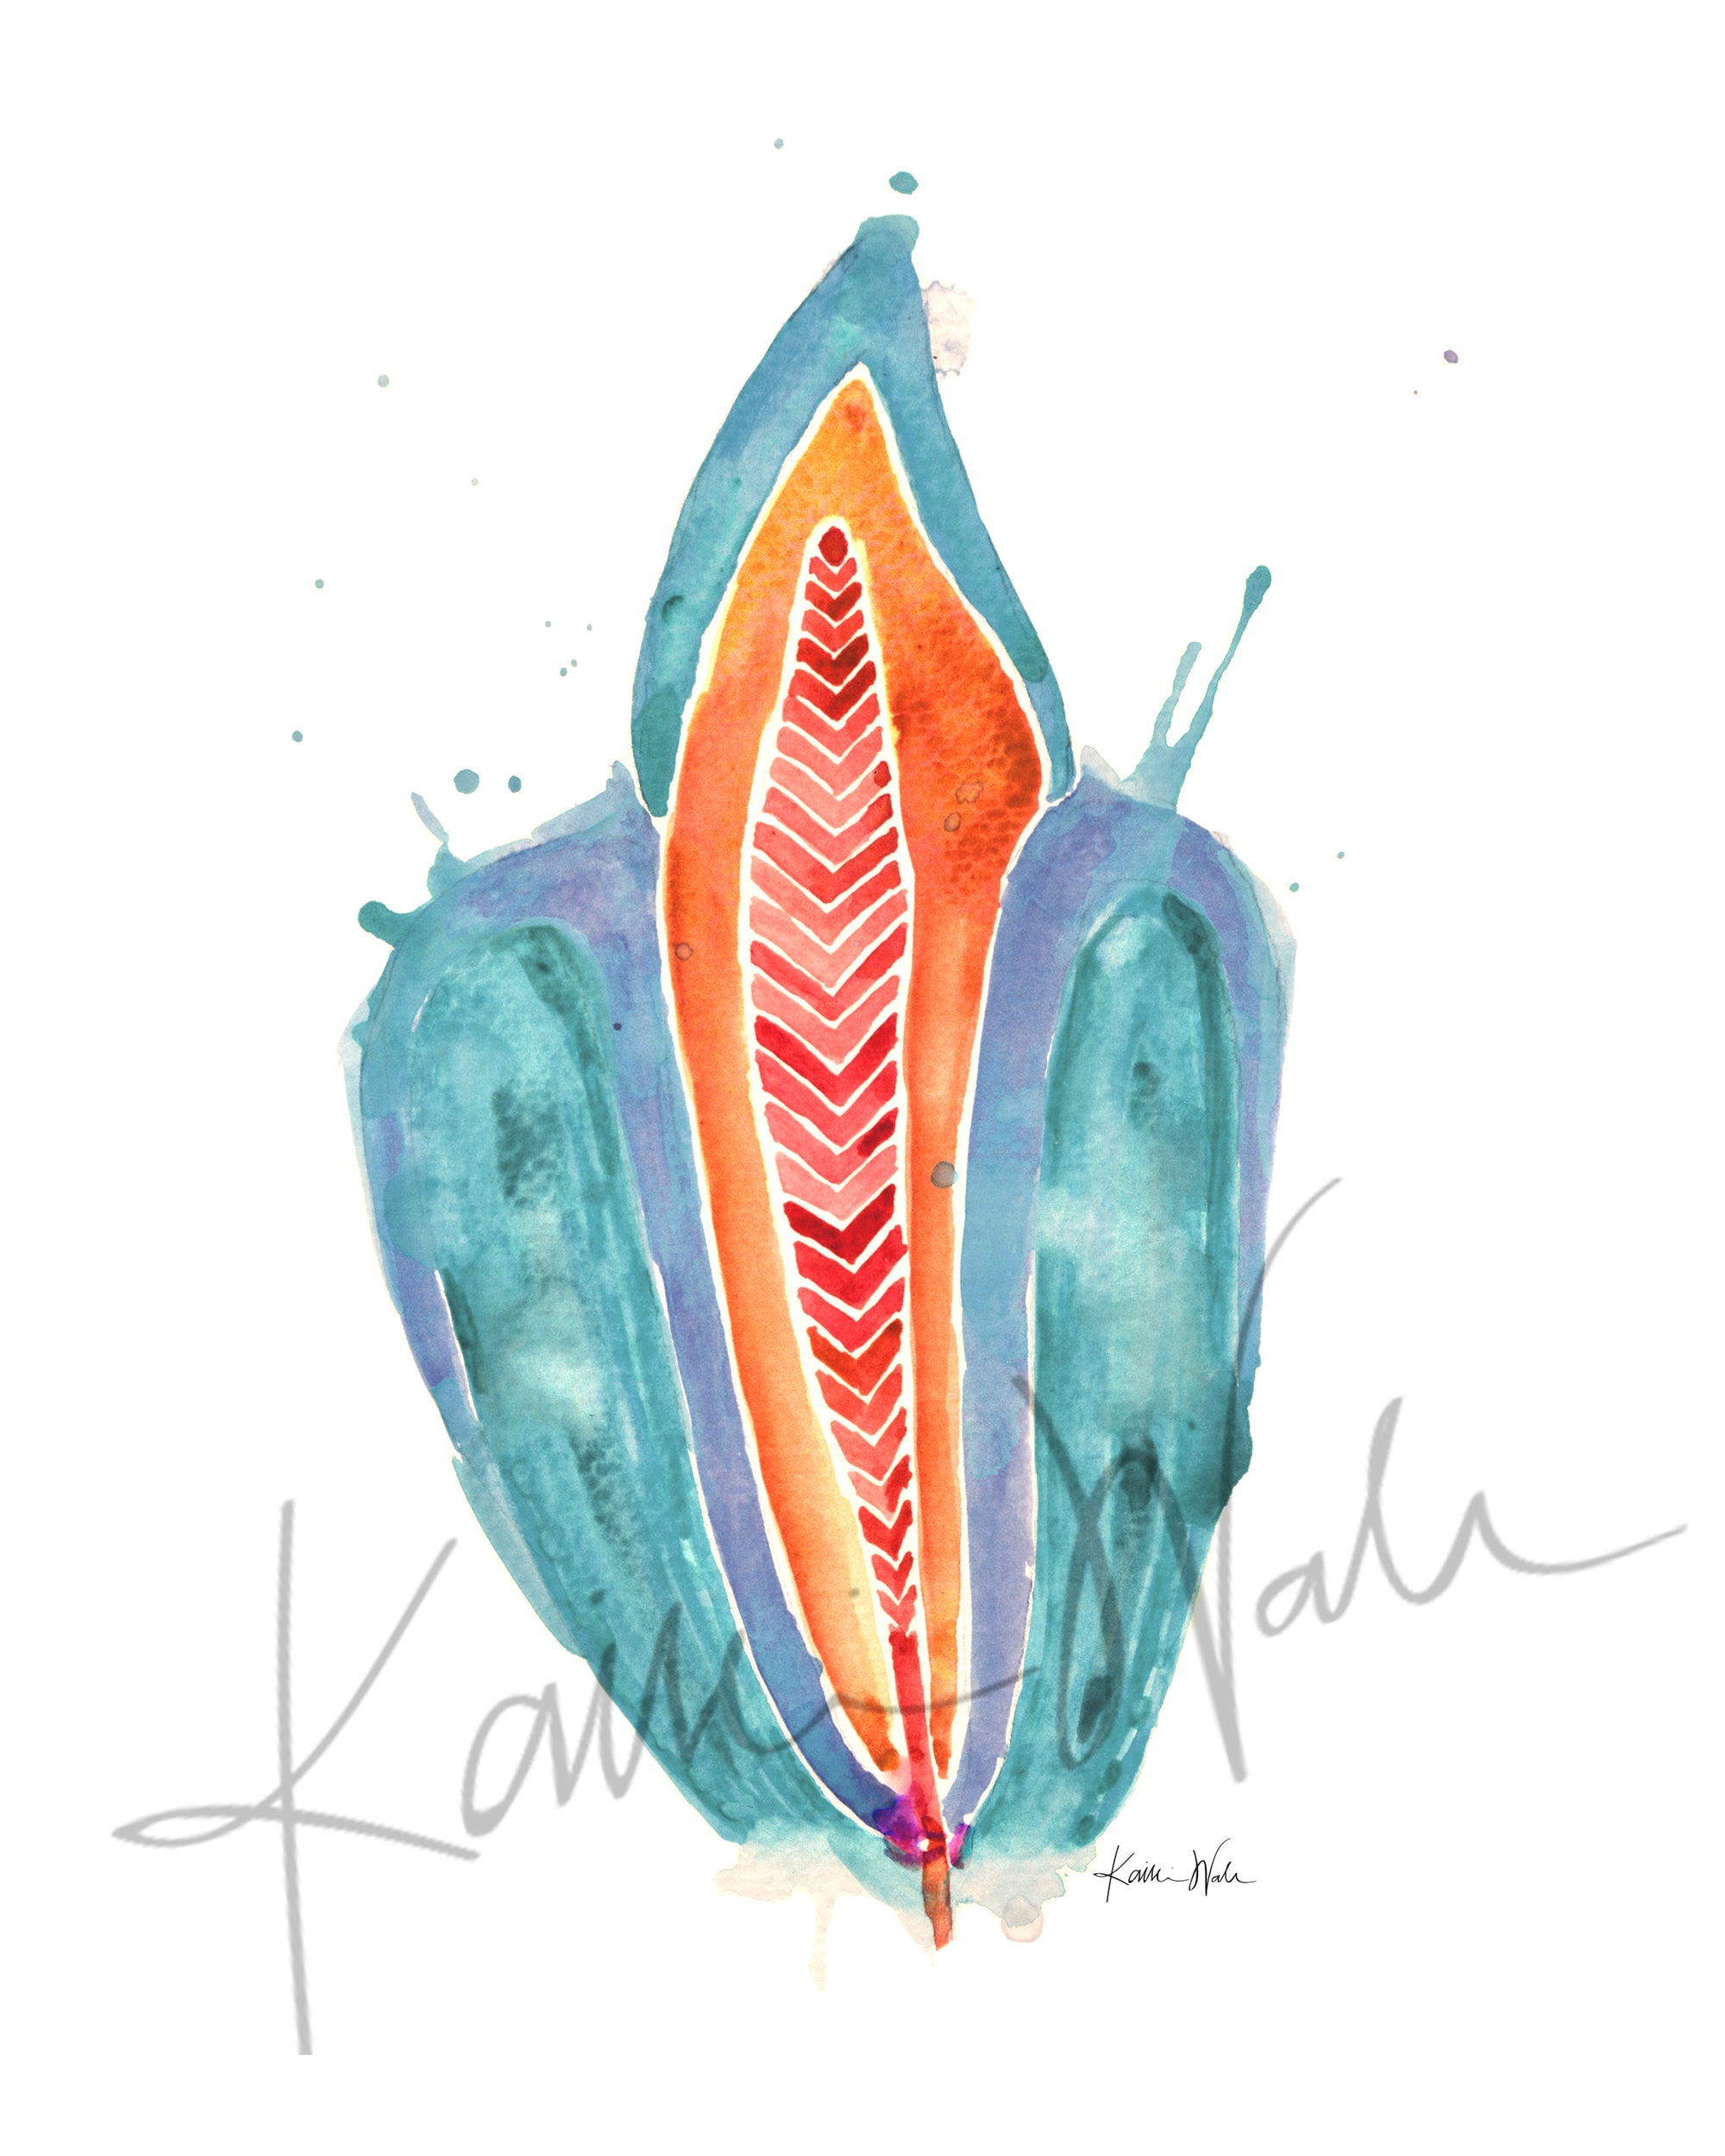 Unframed watercolor painting of an abstract incisor in teal, orange, and red.